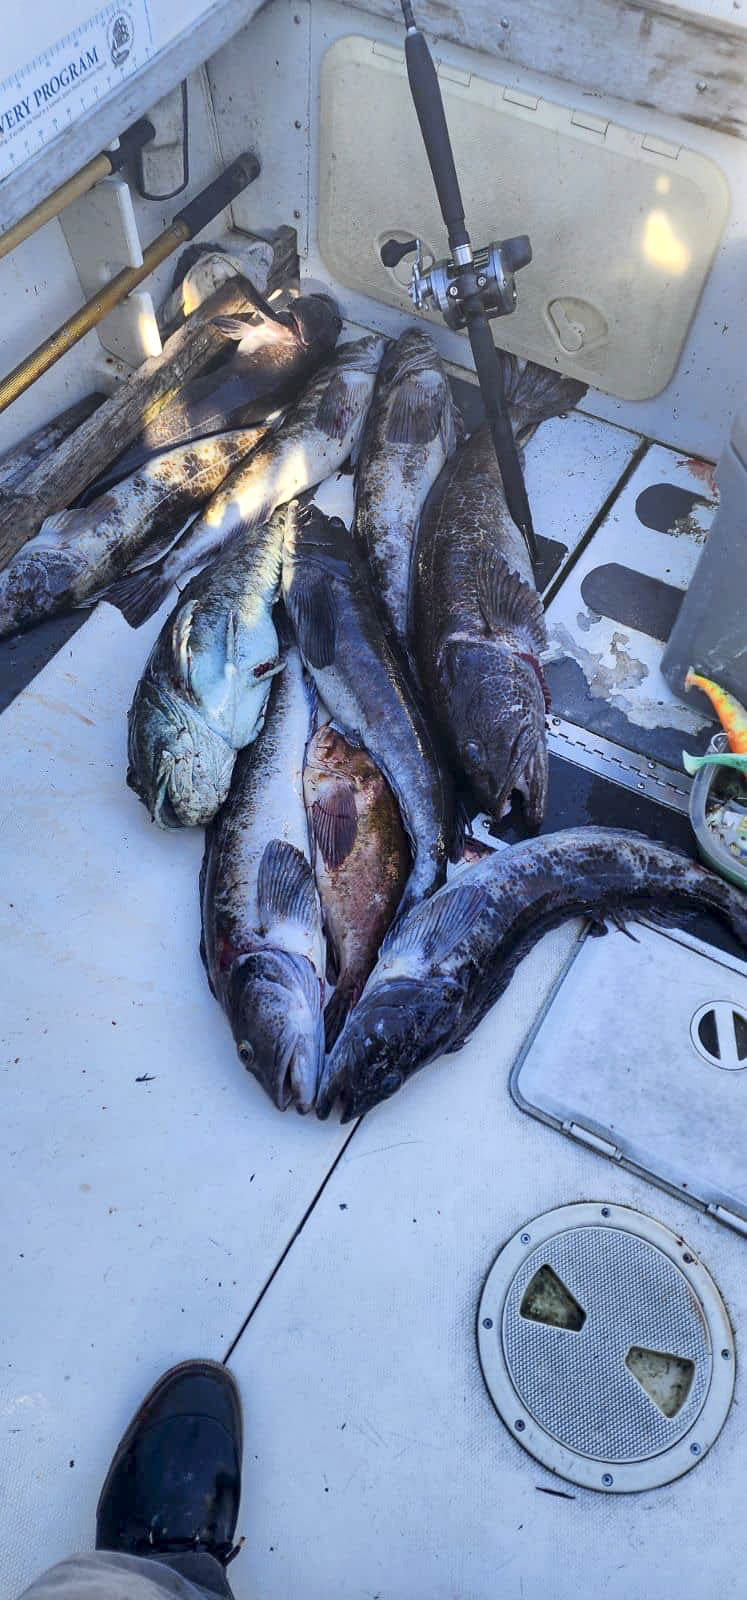 a pile of fish on a boat